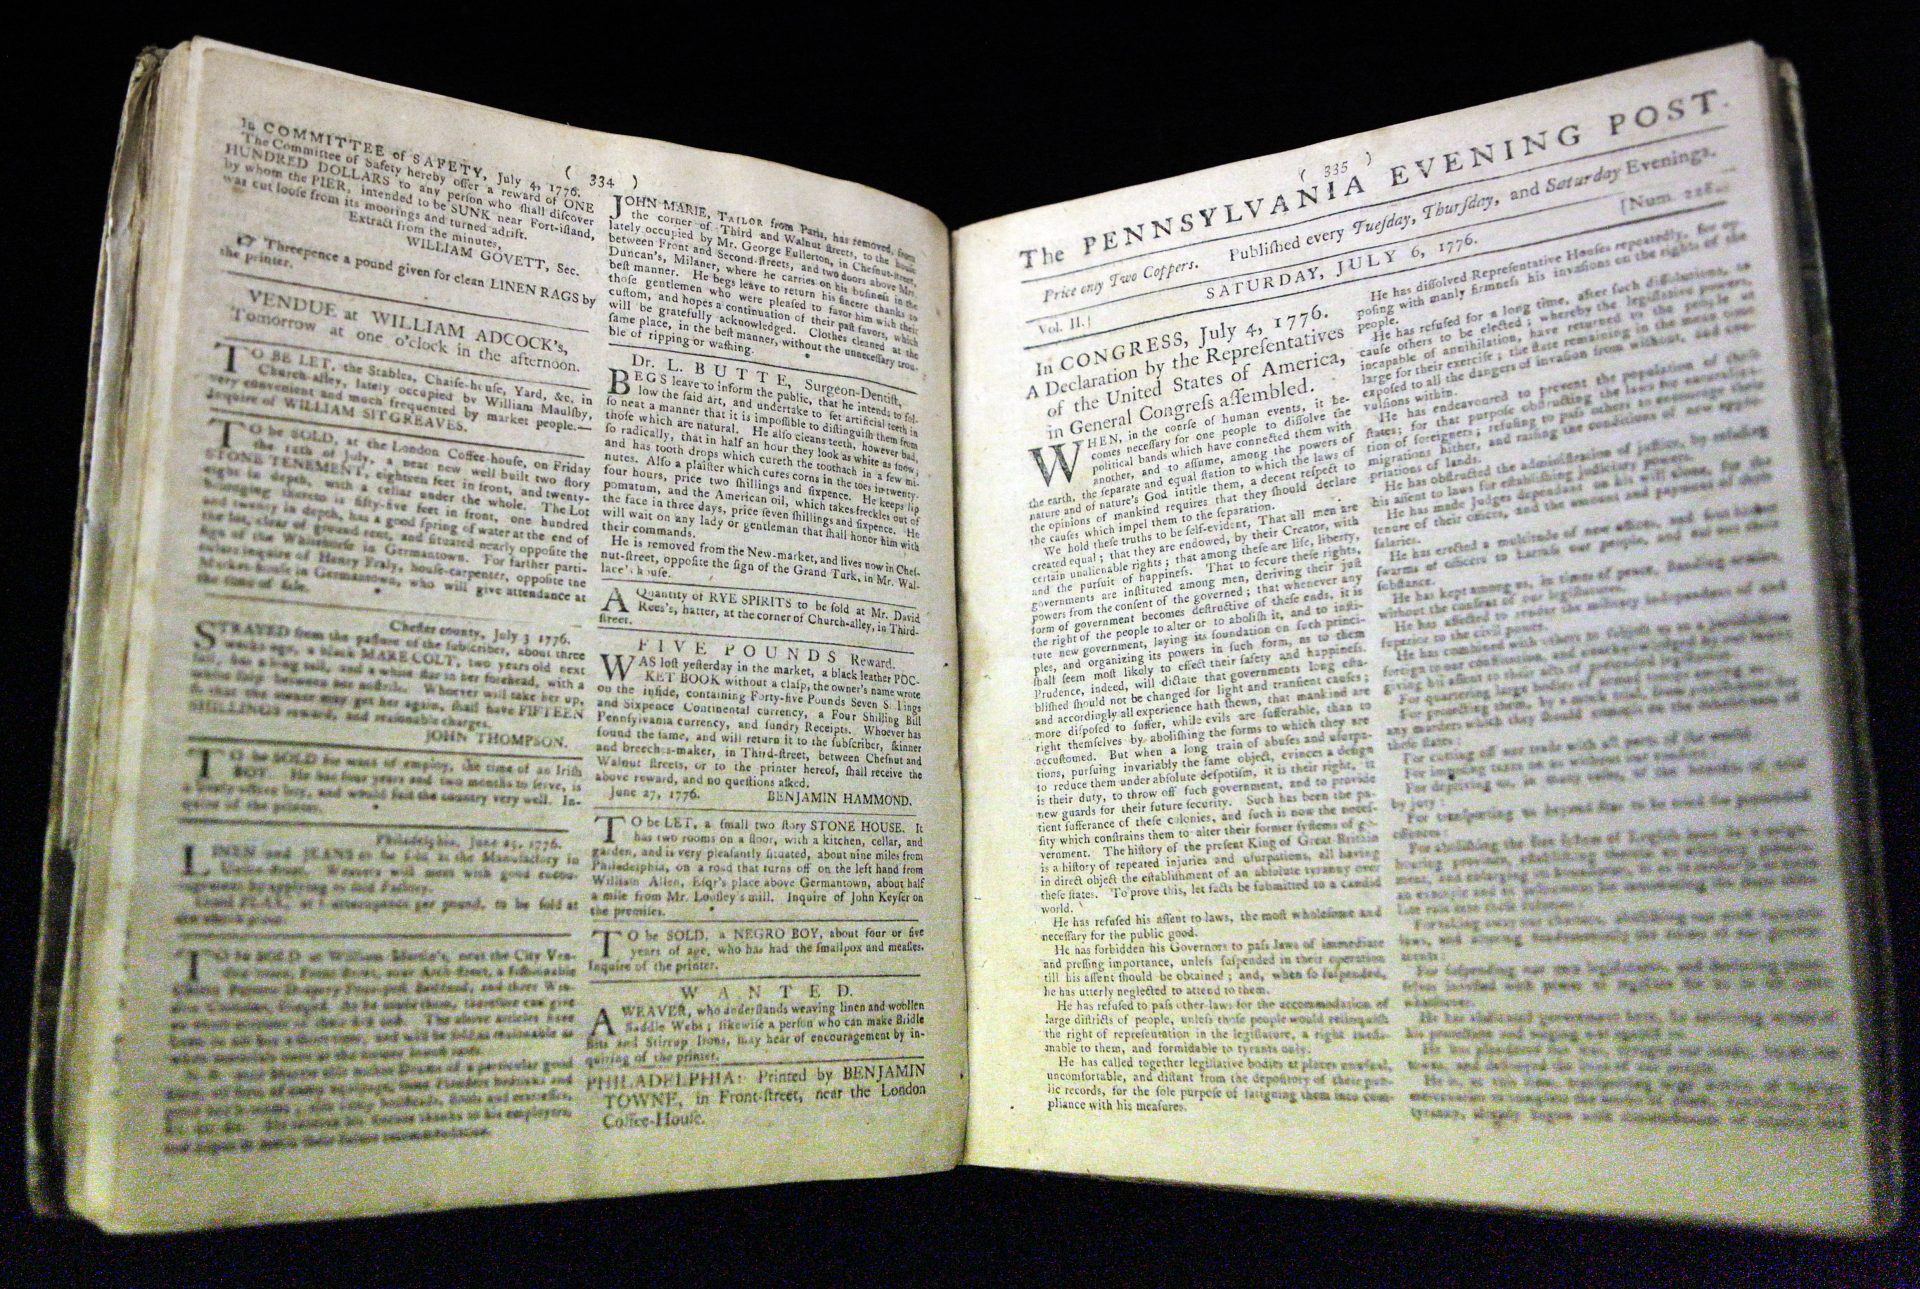 In this Thursday, June 28, 2012 photo is the first newspaper printing of the Declaration of Independence on July 6, 1776 in The Pennsylvania Evening Post, according to Scott Stephenson.